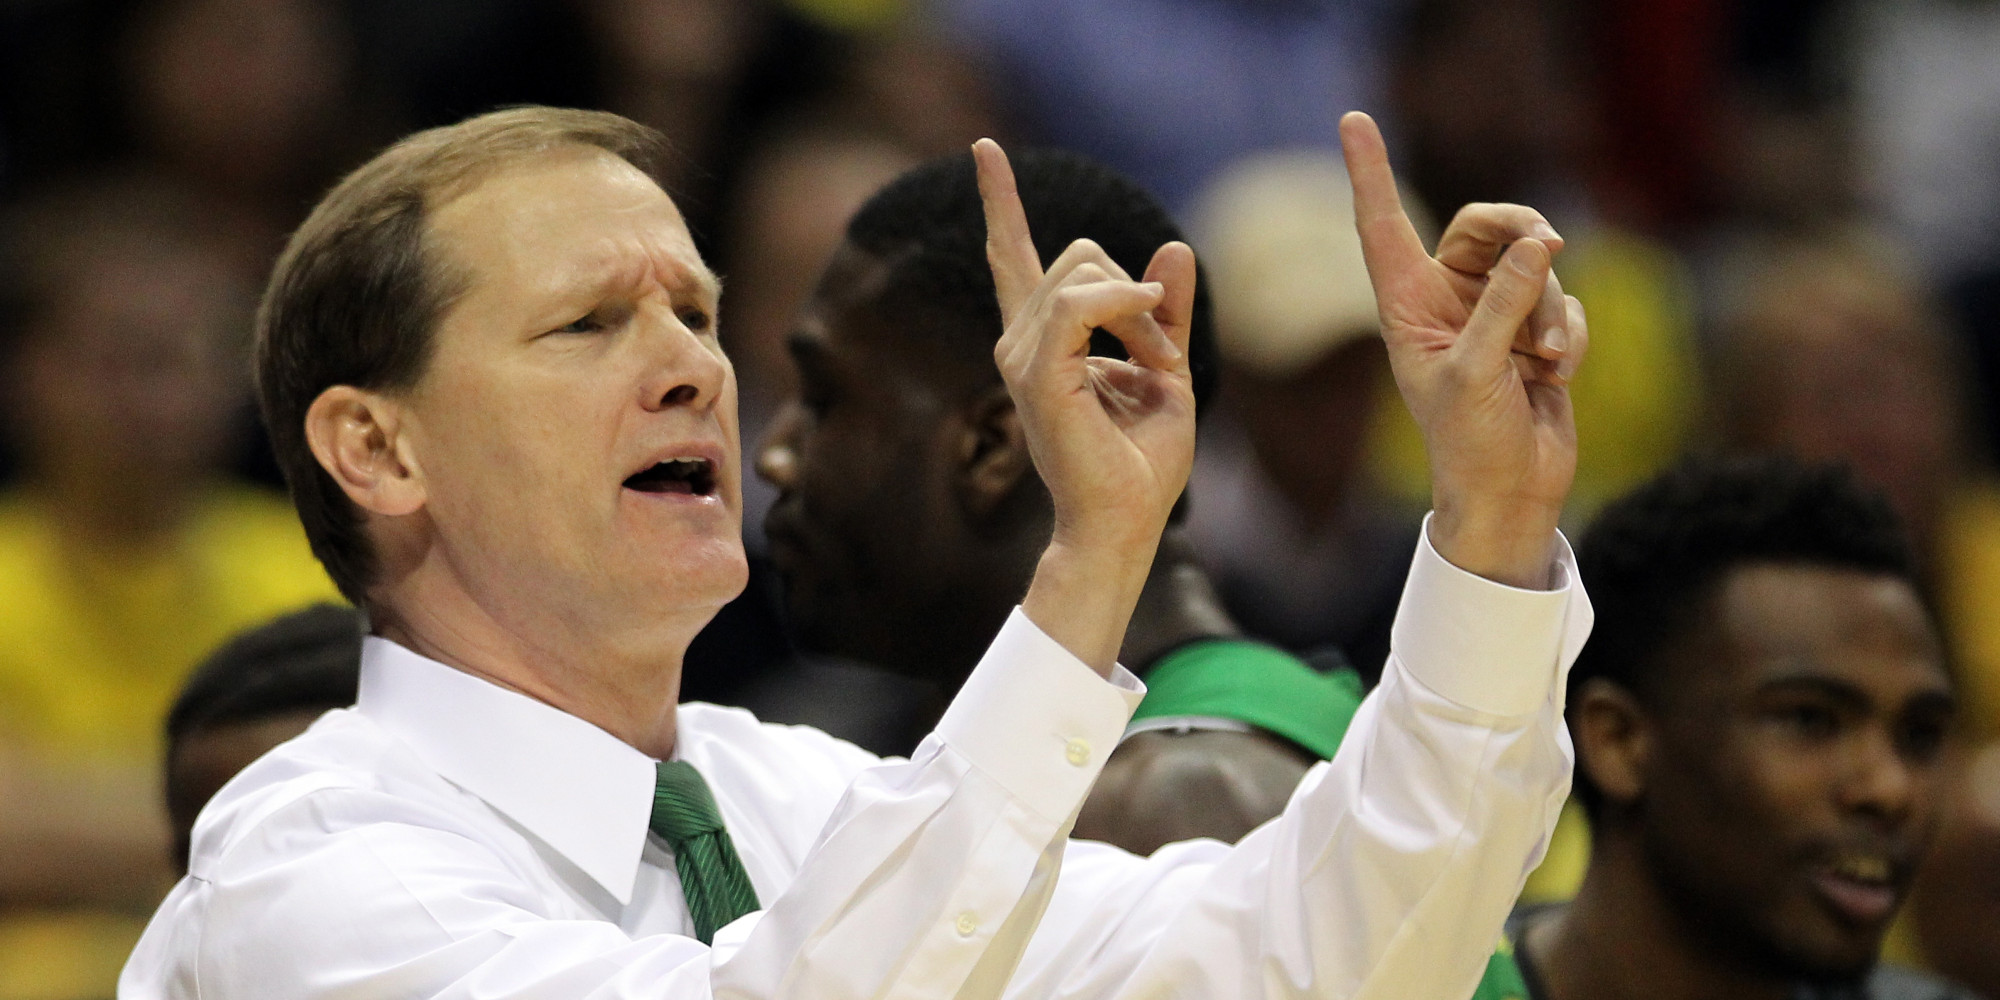 Oregon Basketball Coach Sued By Alleged Rape Victim For Ignoring Player